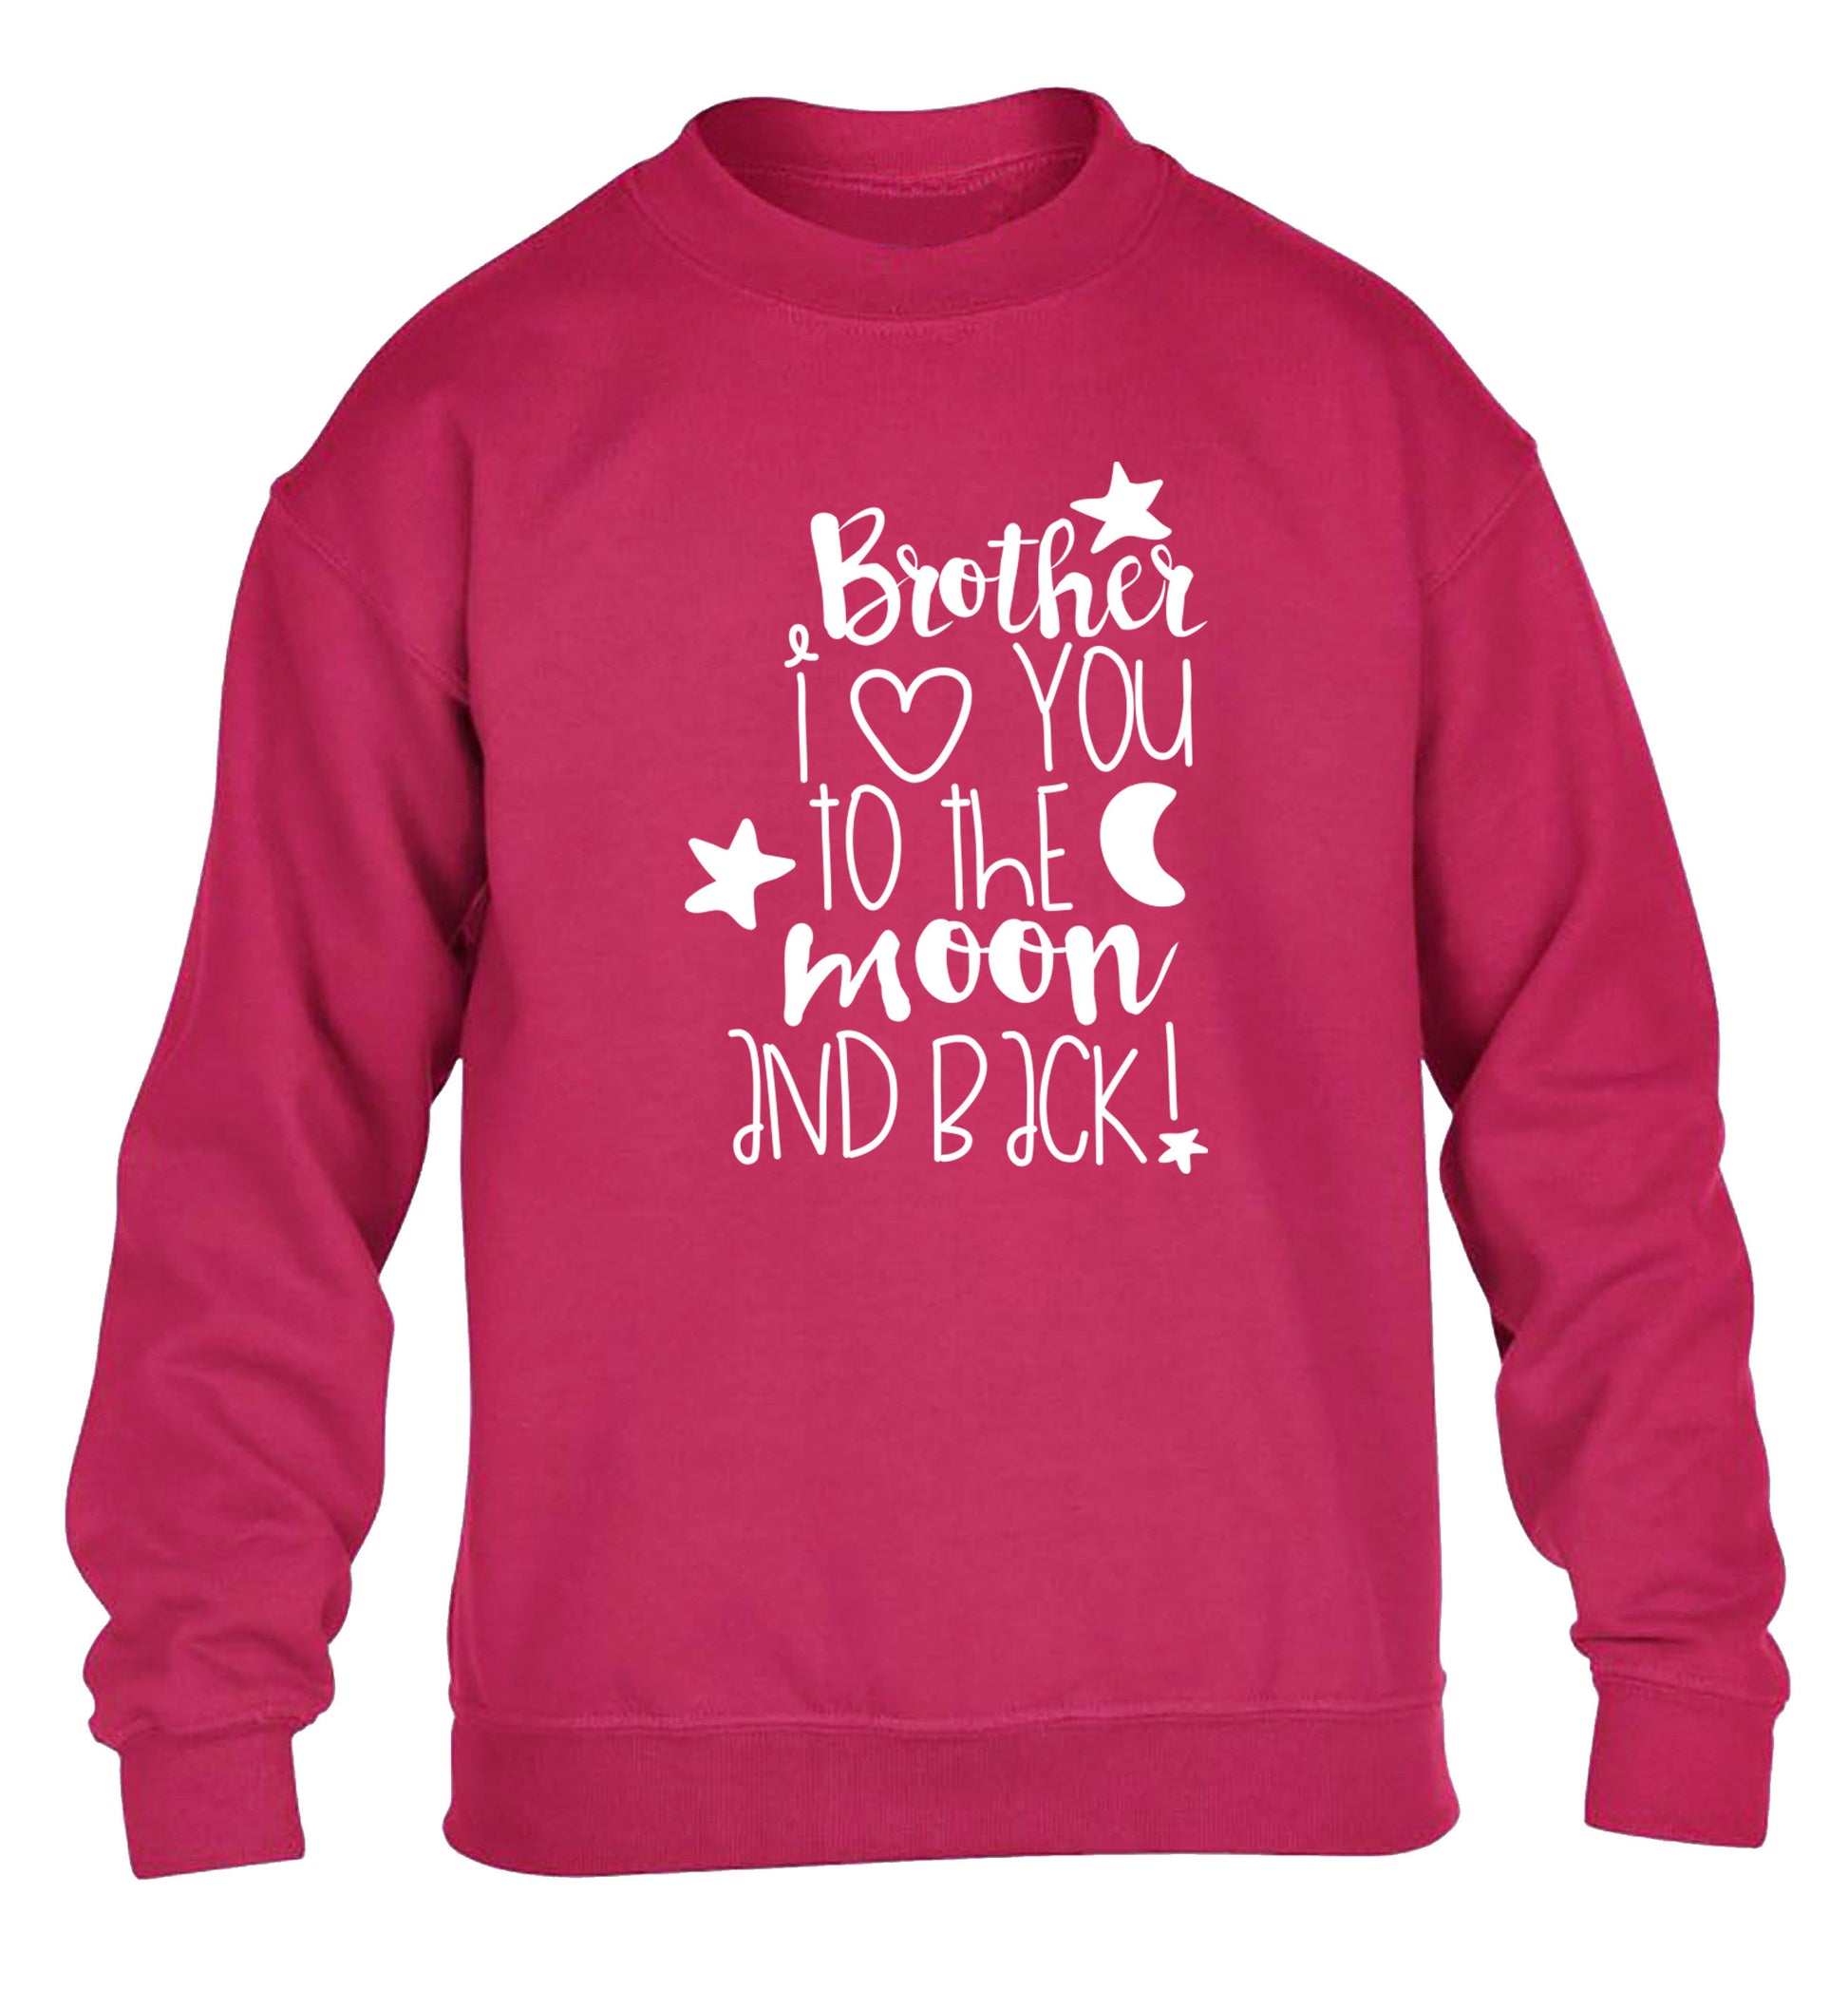 Brother I love you to the moon and back children's pink  sweater 12-14 Years